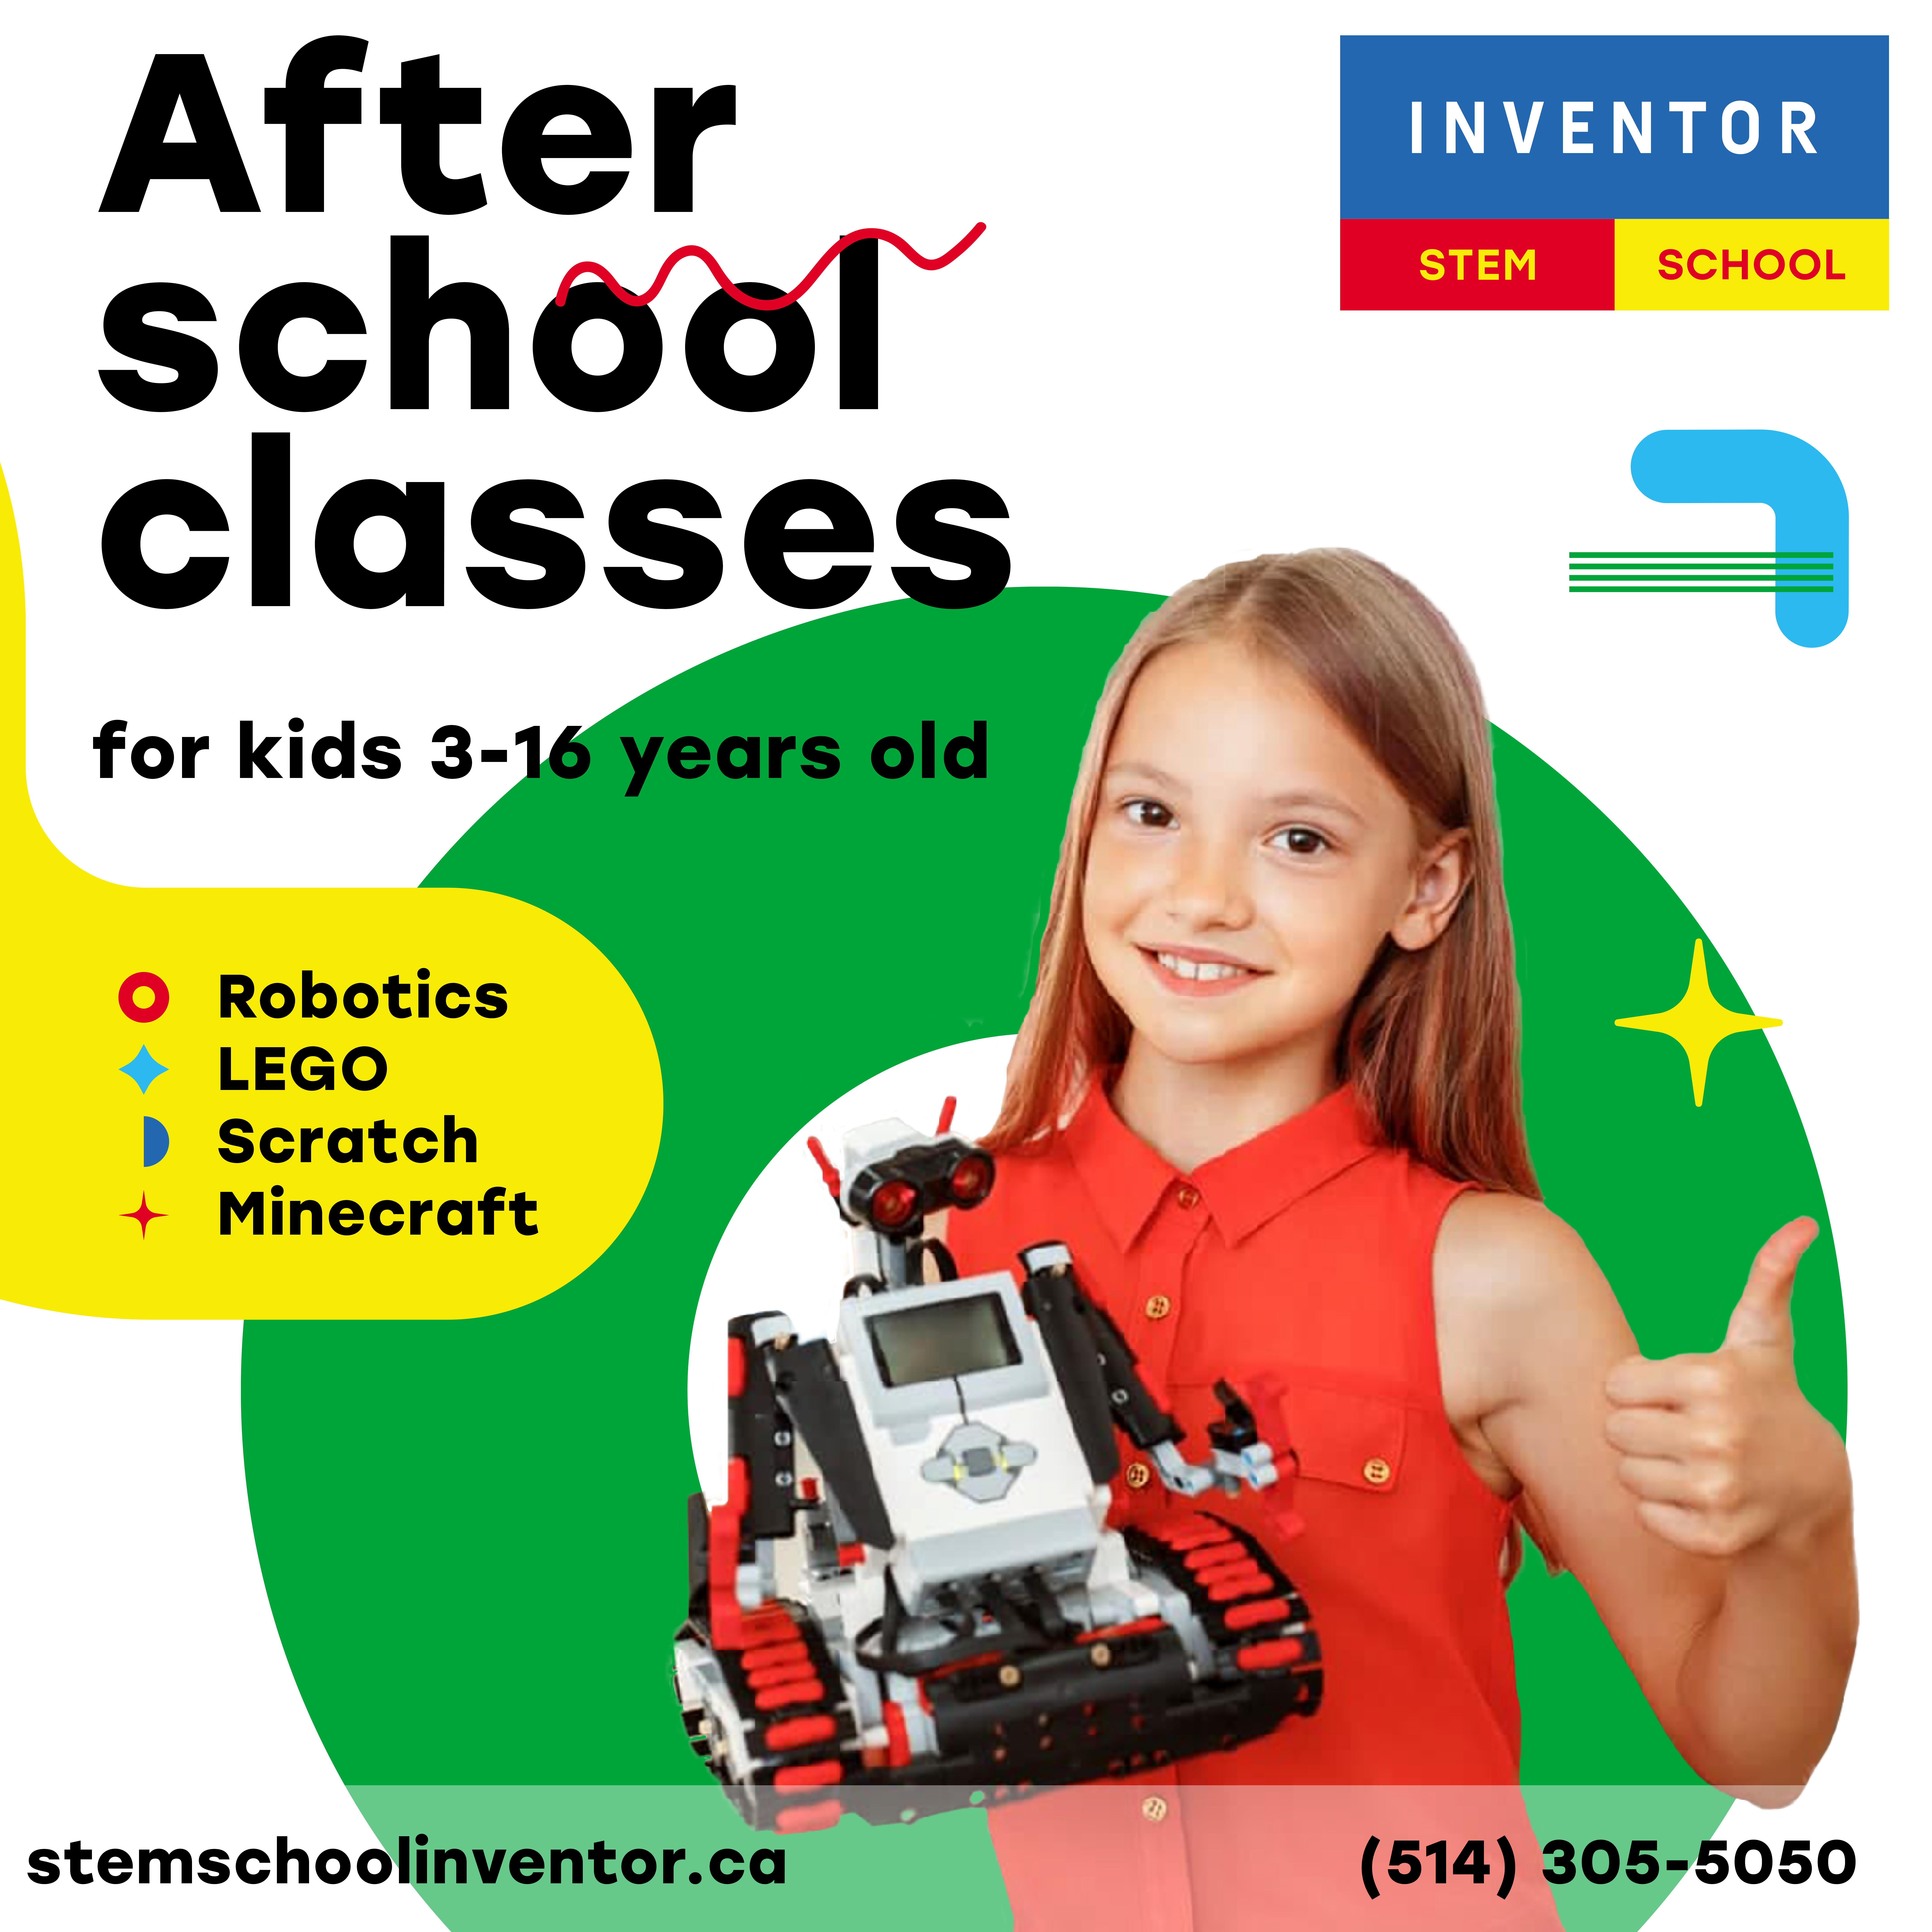 Reasons to Include After School STEM Classes for Kids